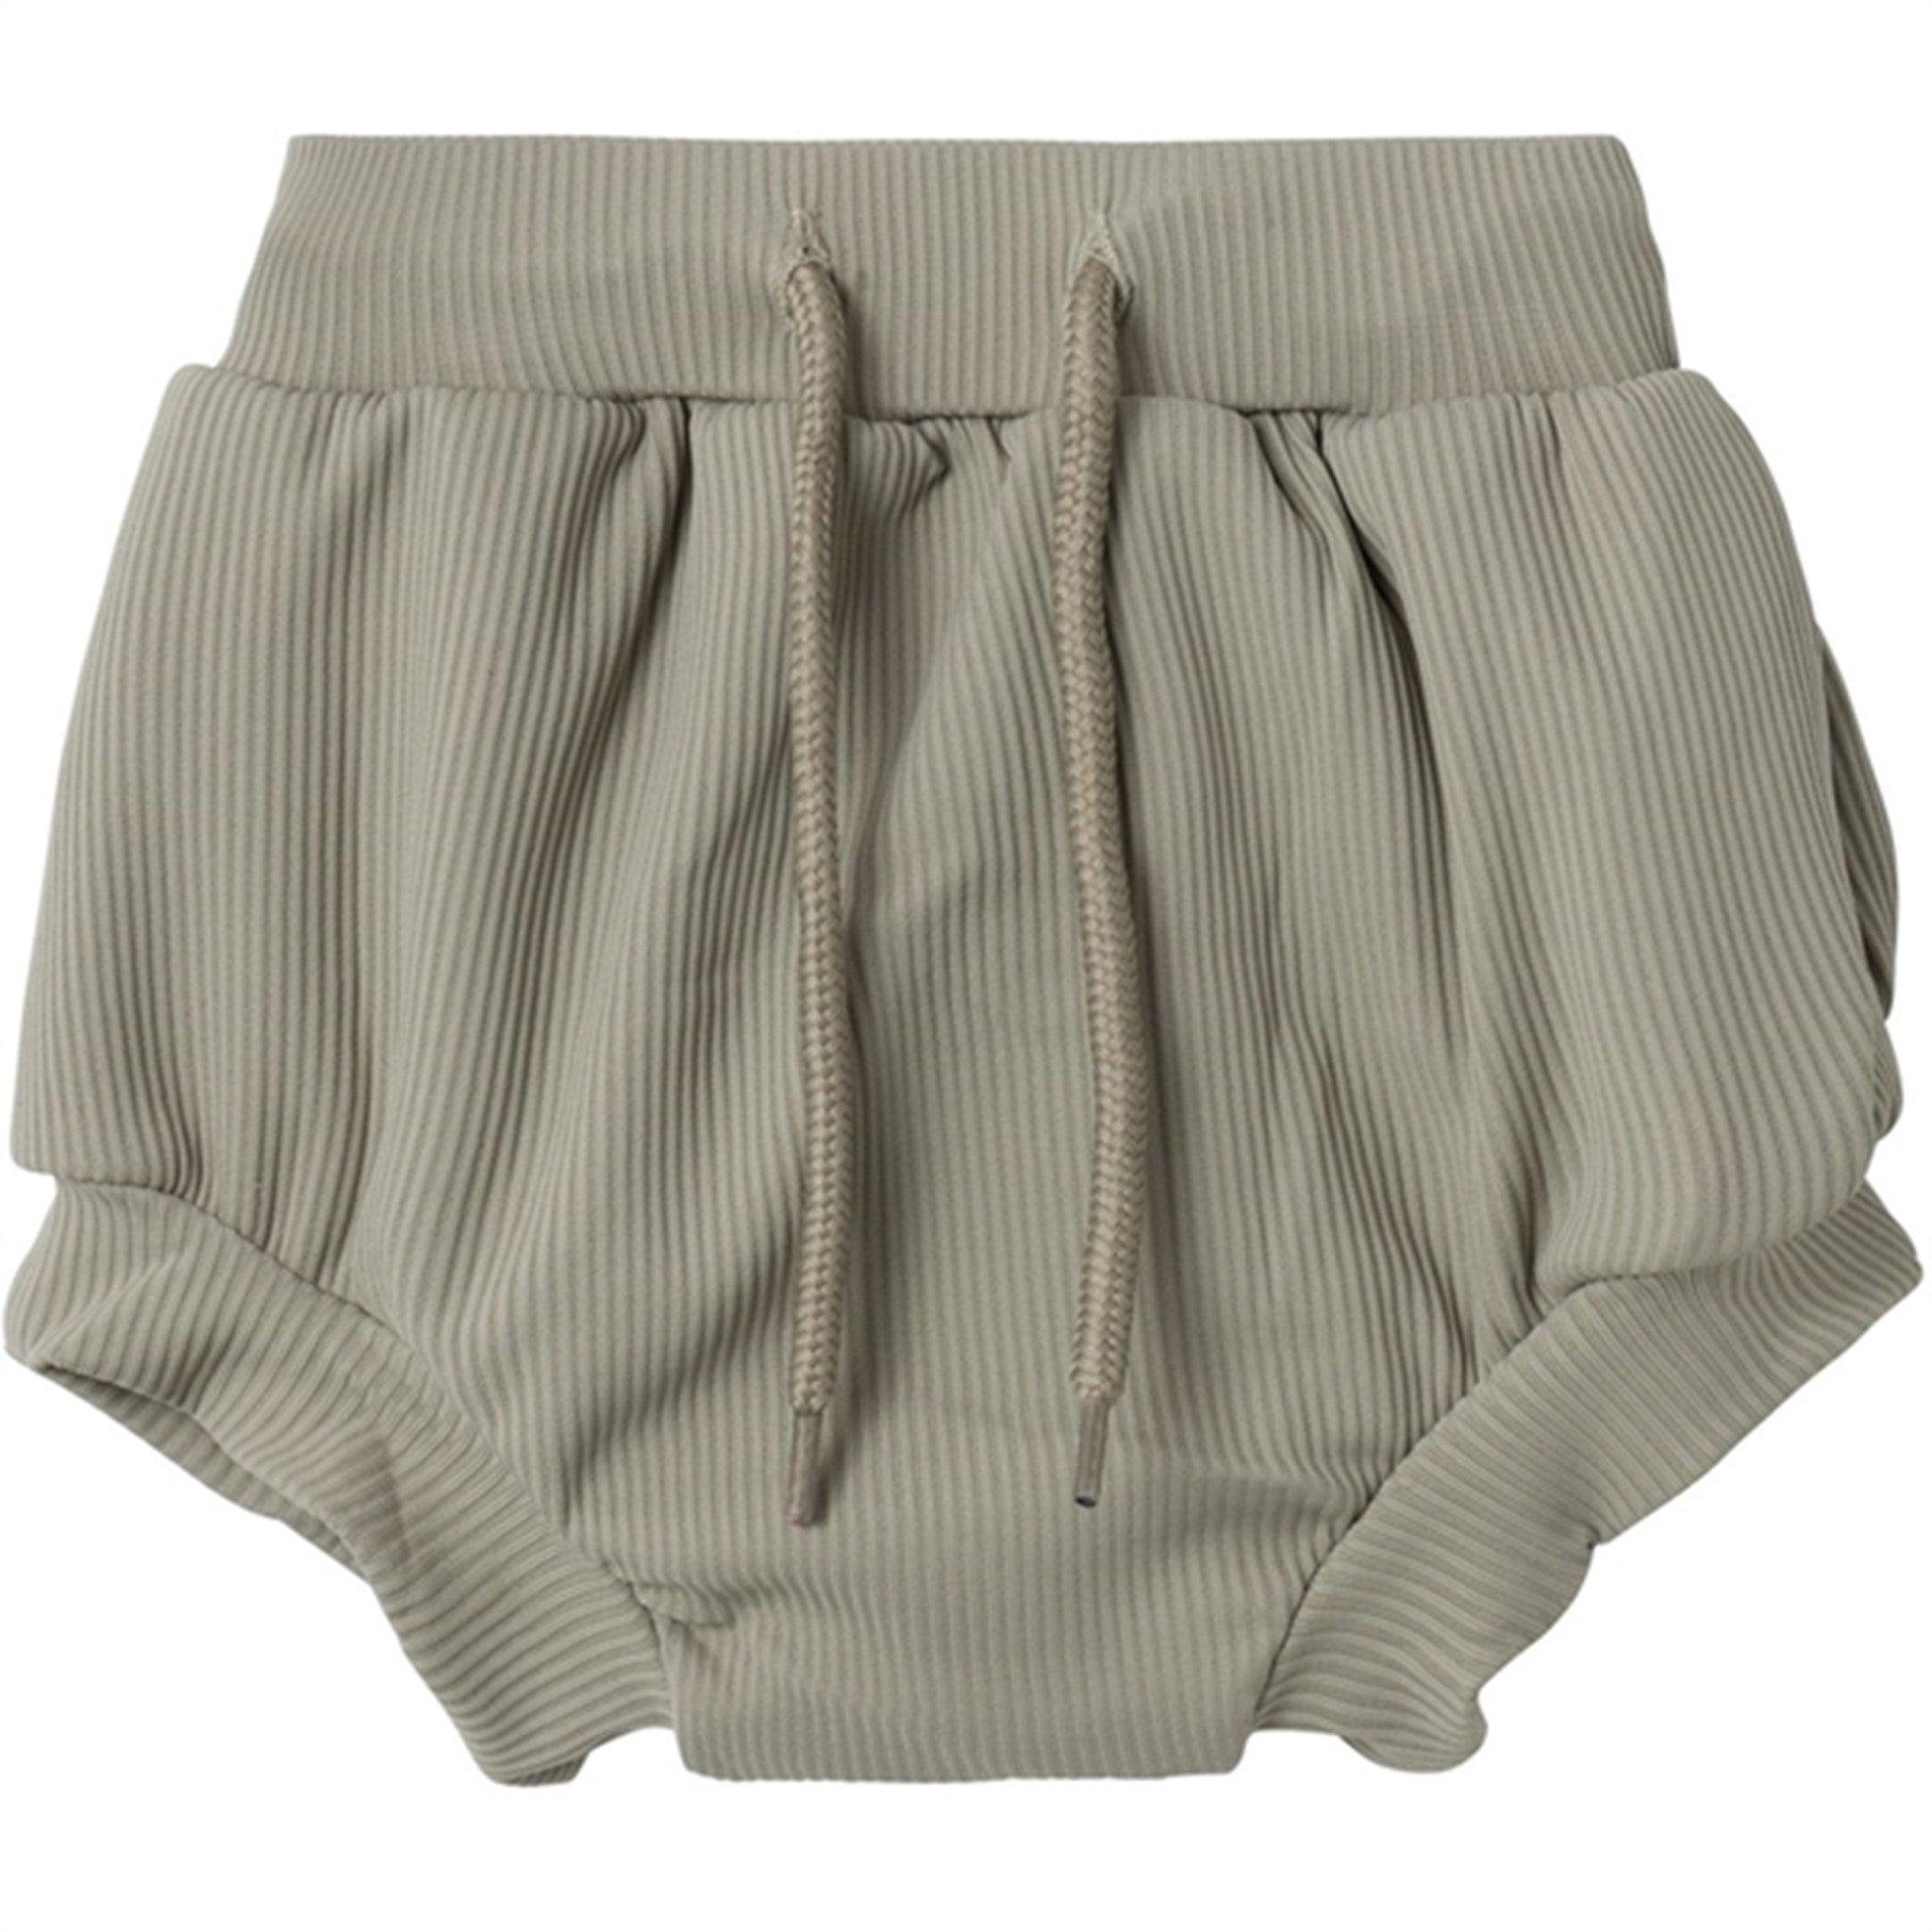 Lil'Atelier Dried Sage Farley Bade Bloomers